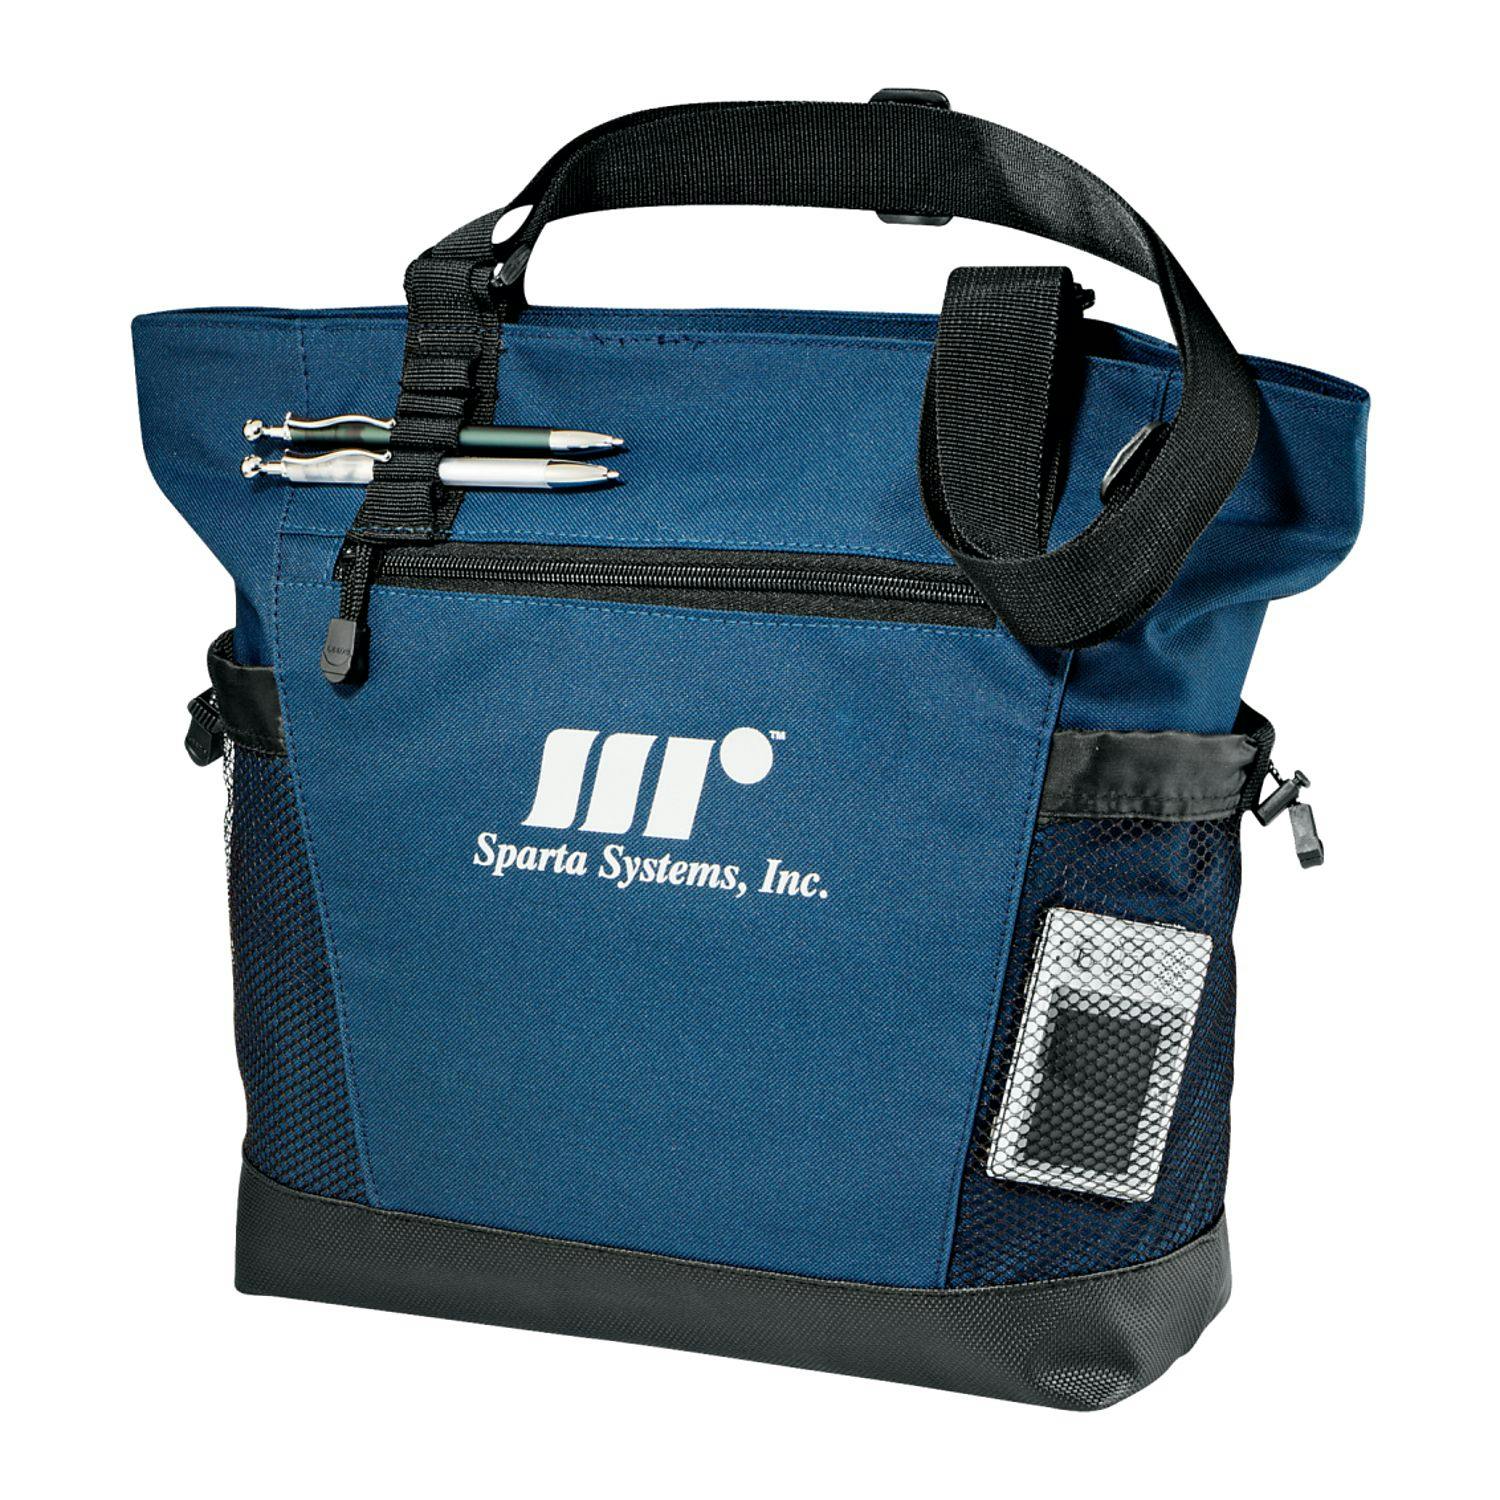 Urban Passage Zippered Travel Business Tote - additional Image 1